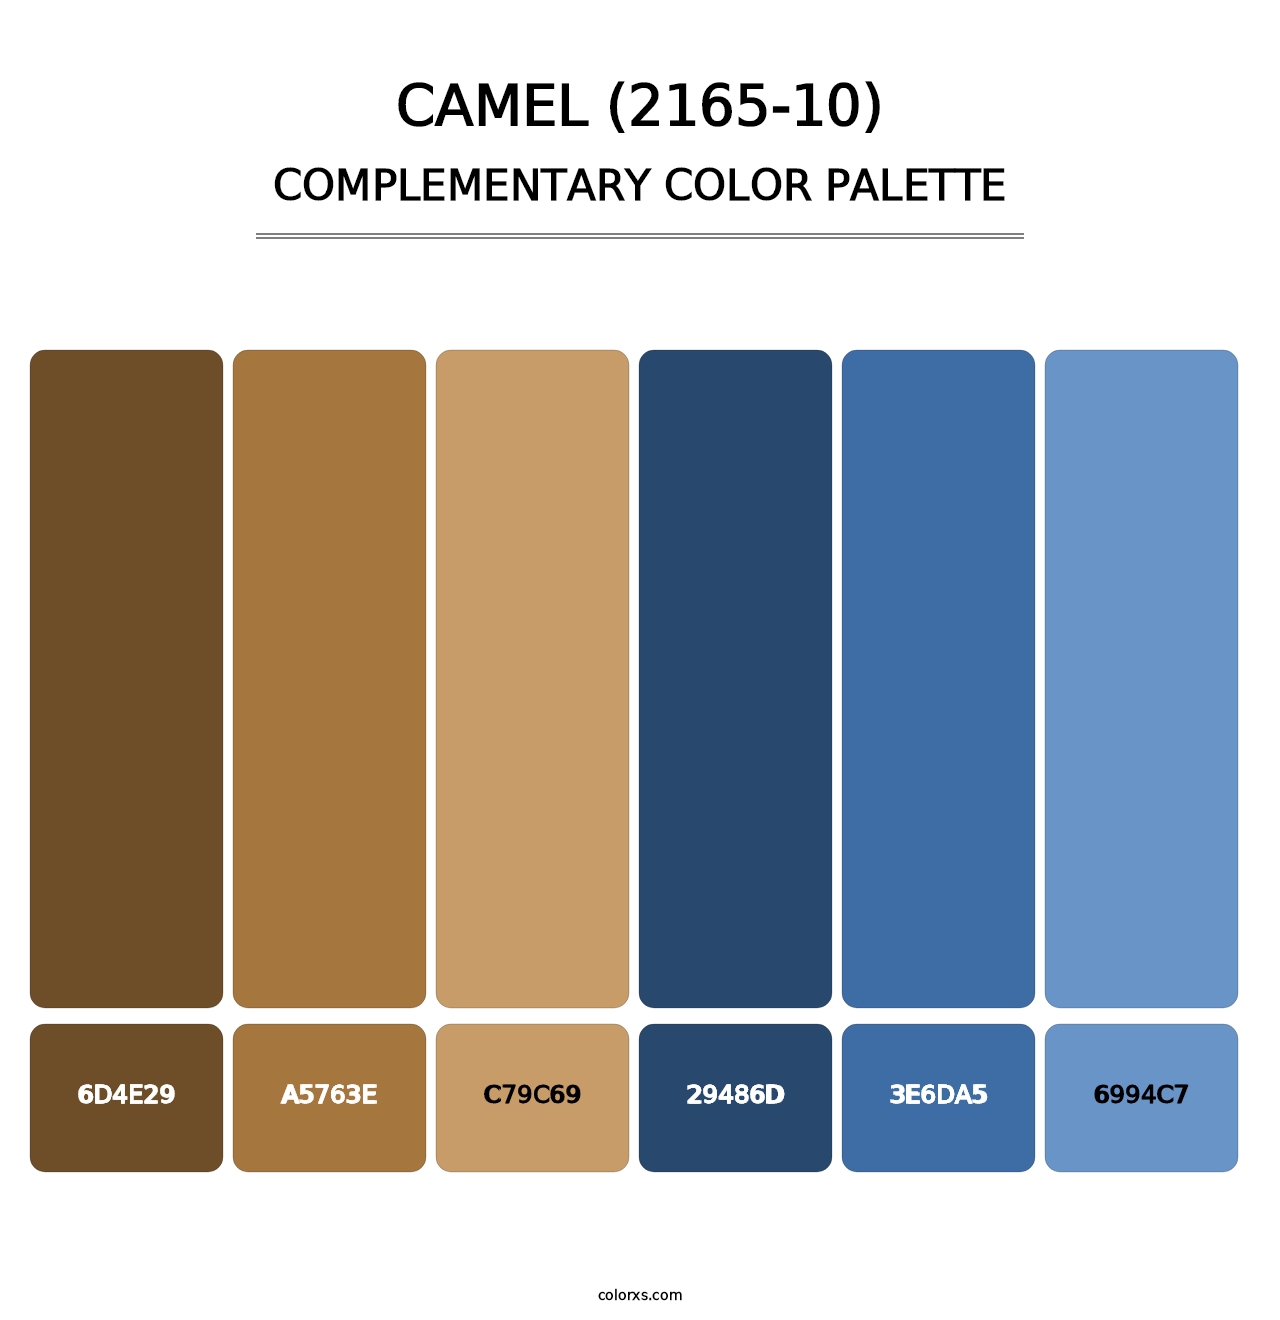 Camel (2165-10) - Complementary Color Palette